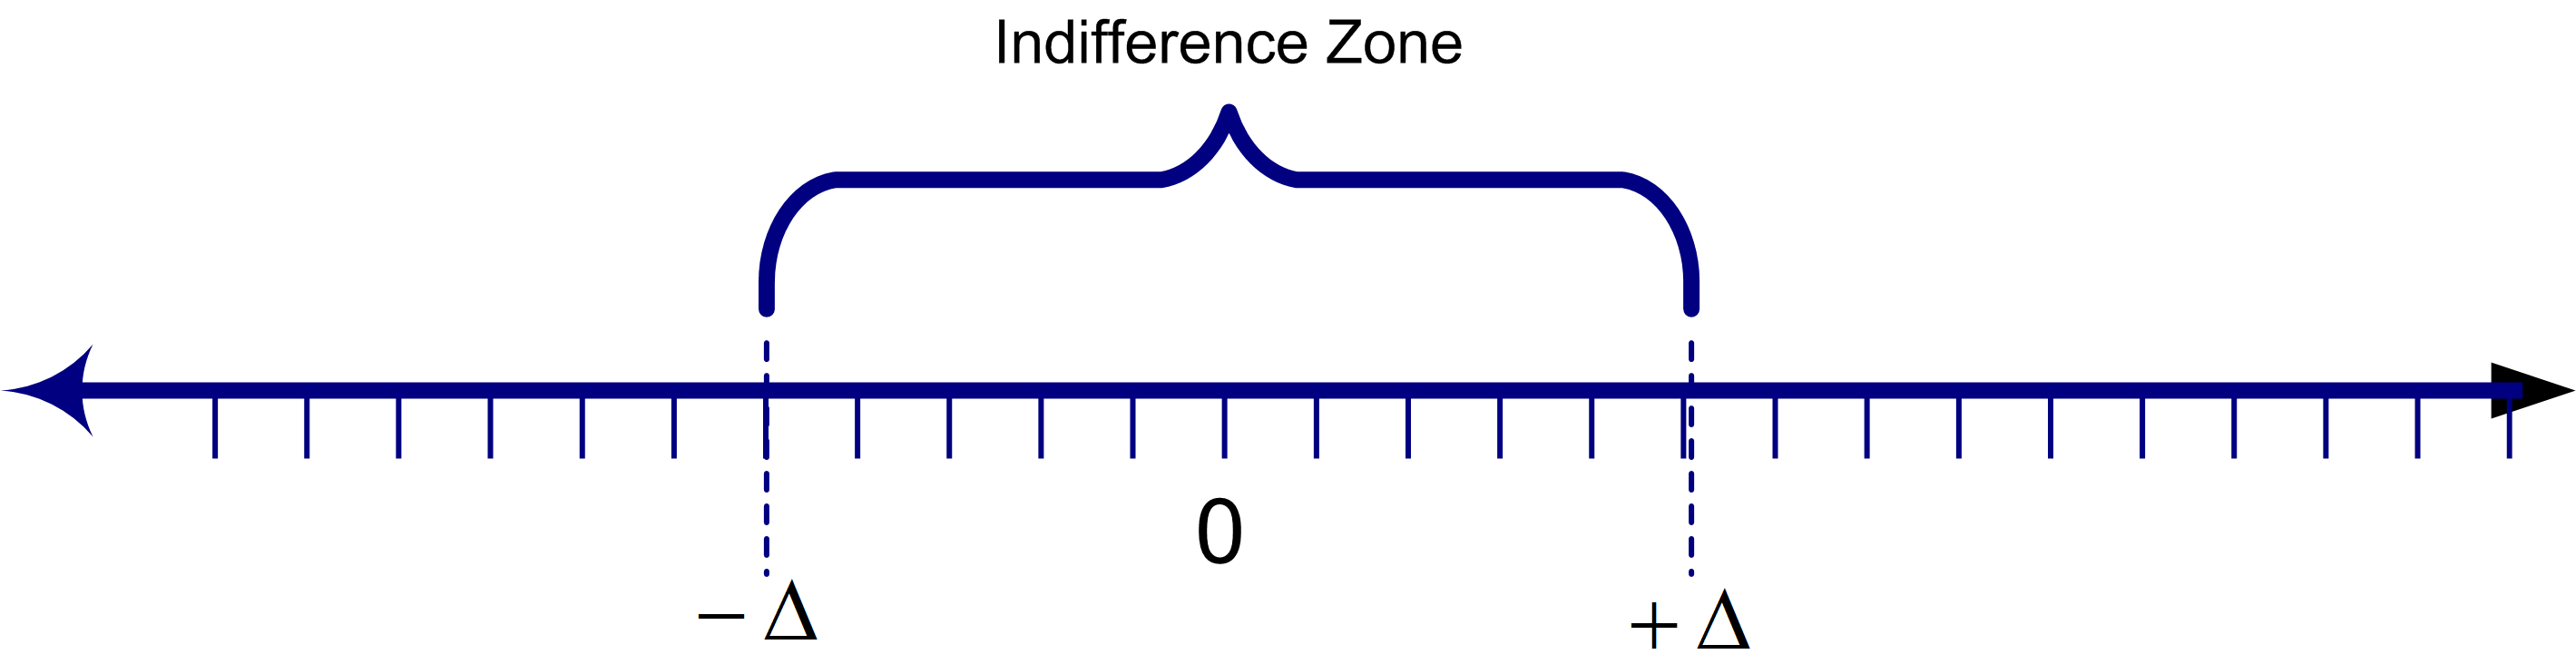 Concept of an indifference zone